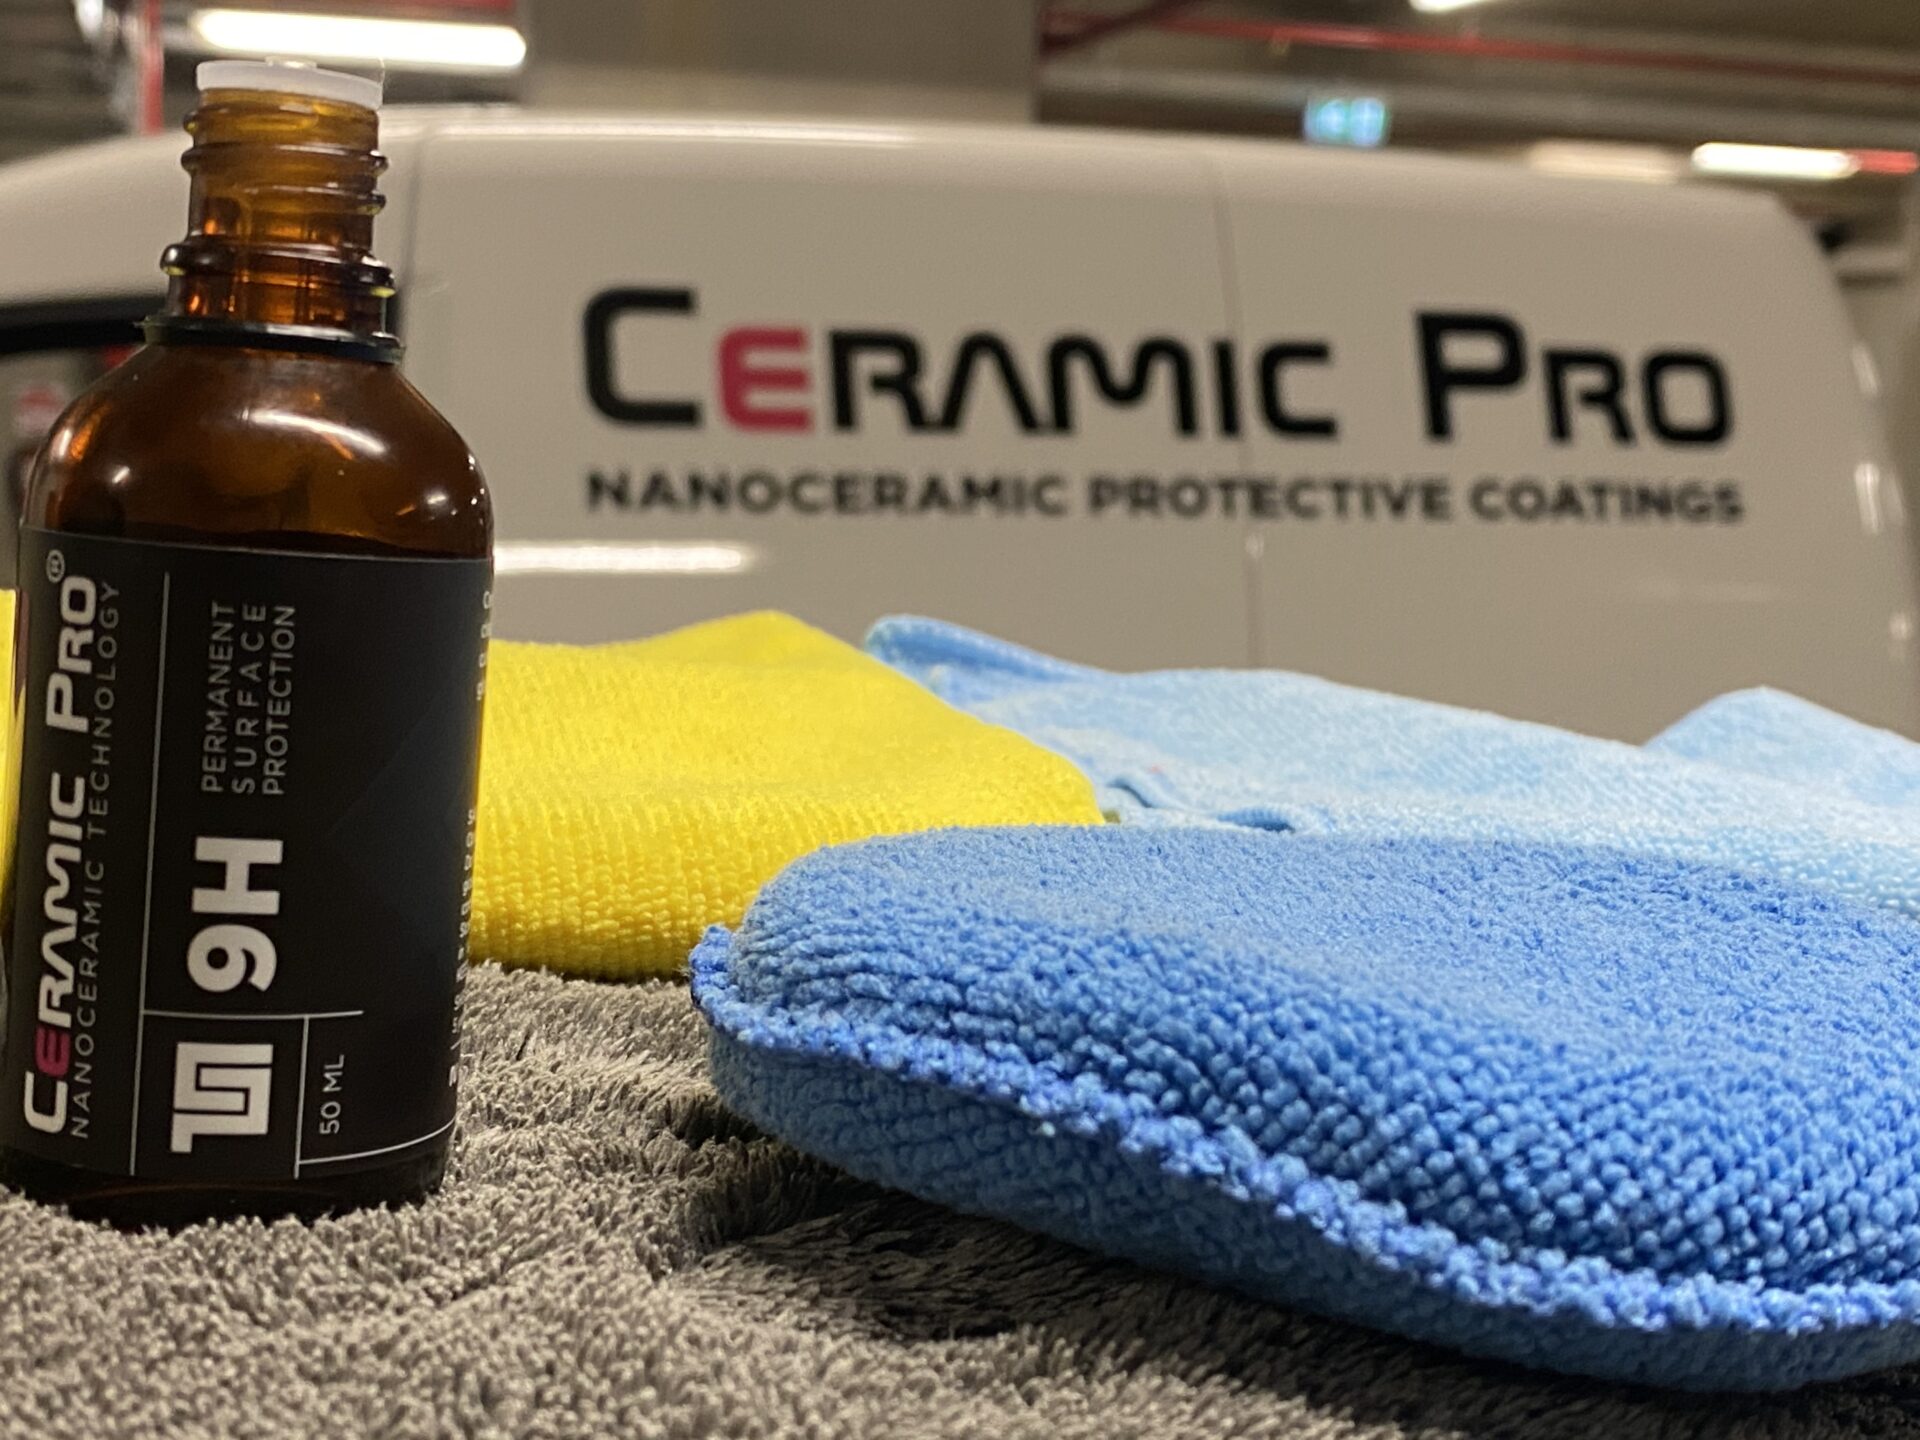 What a Ceramic Coating will not Protect